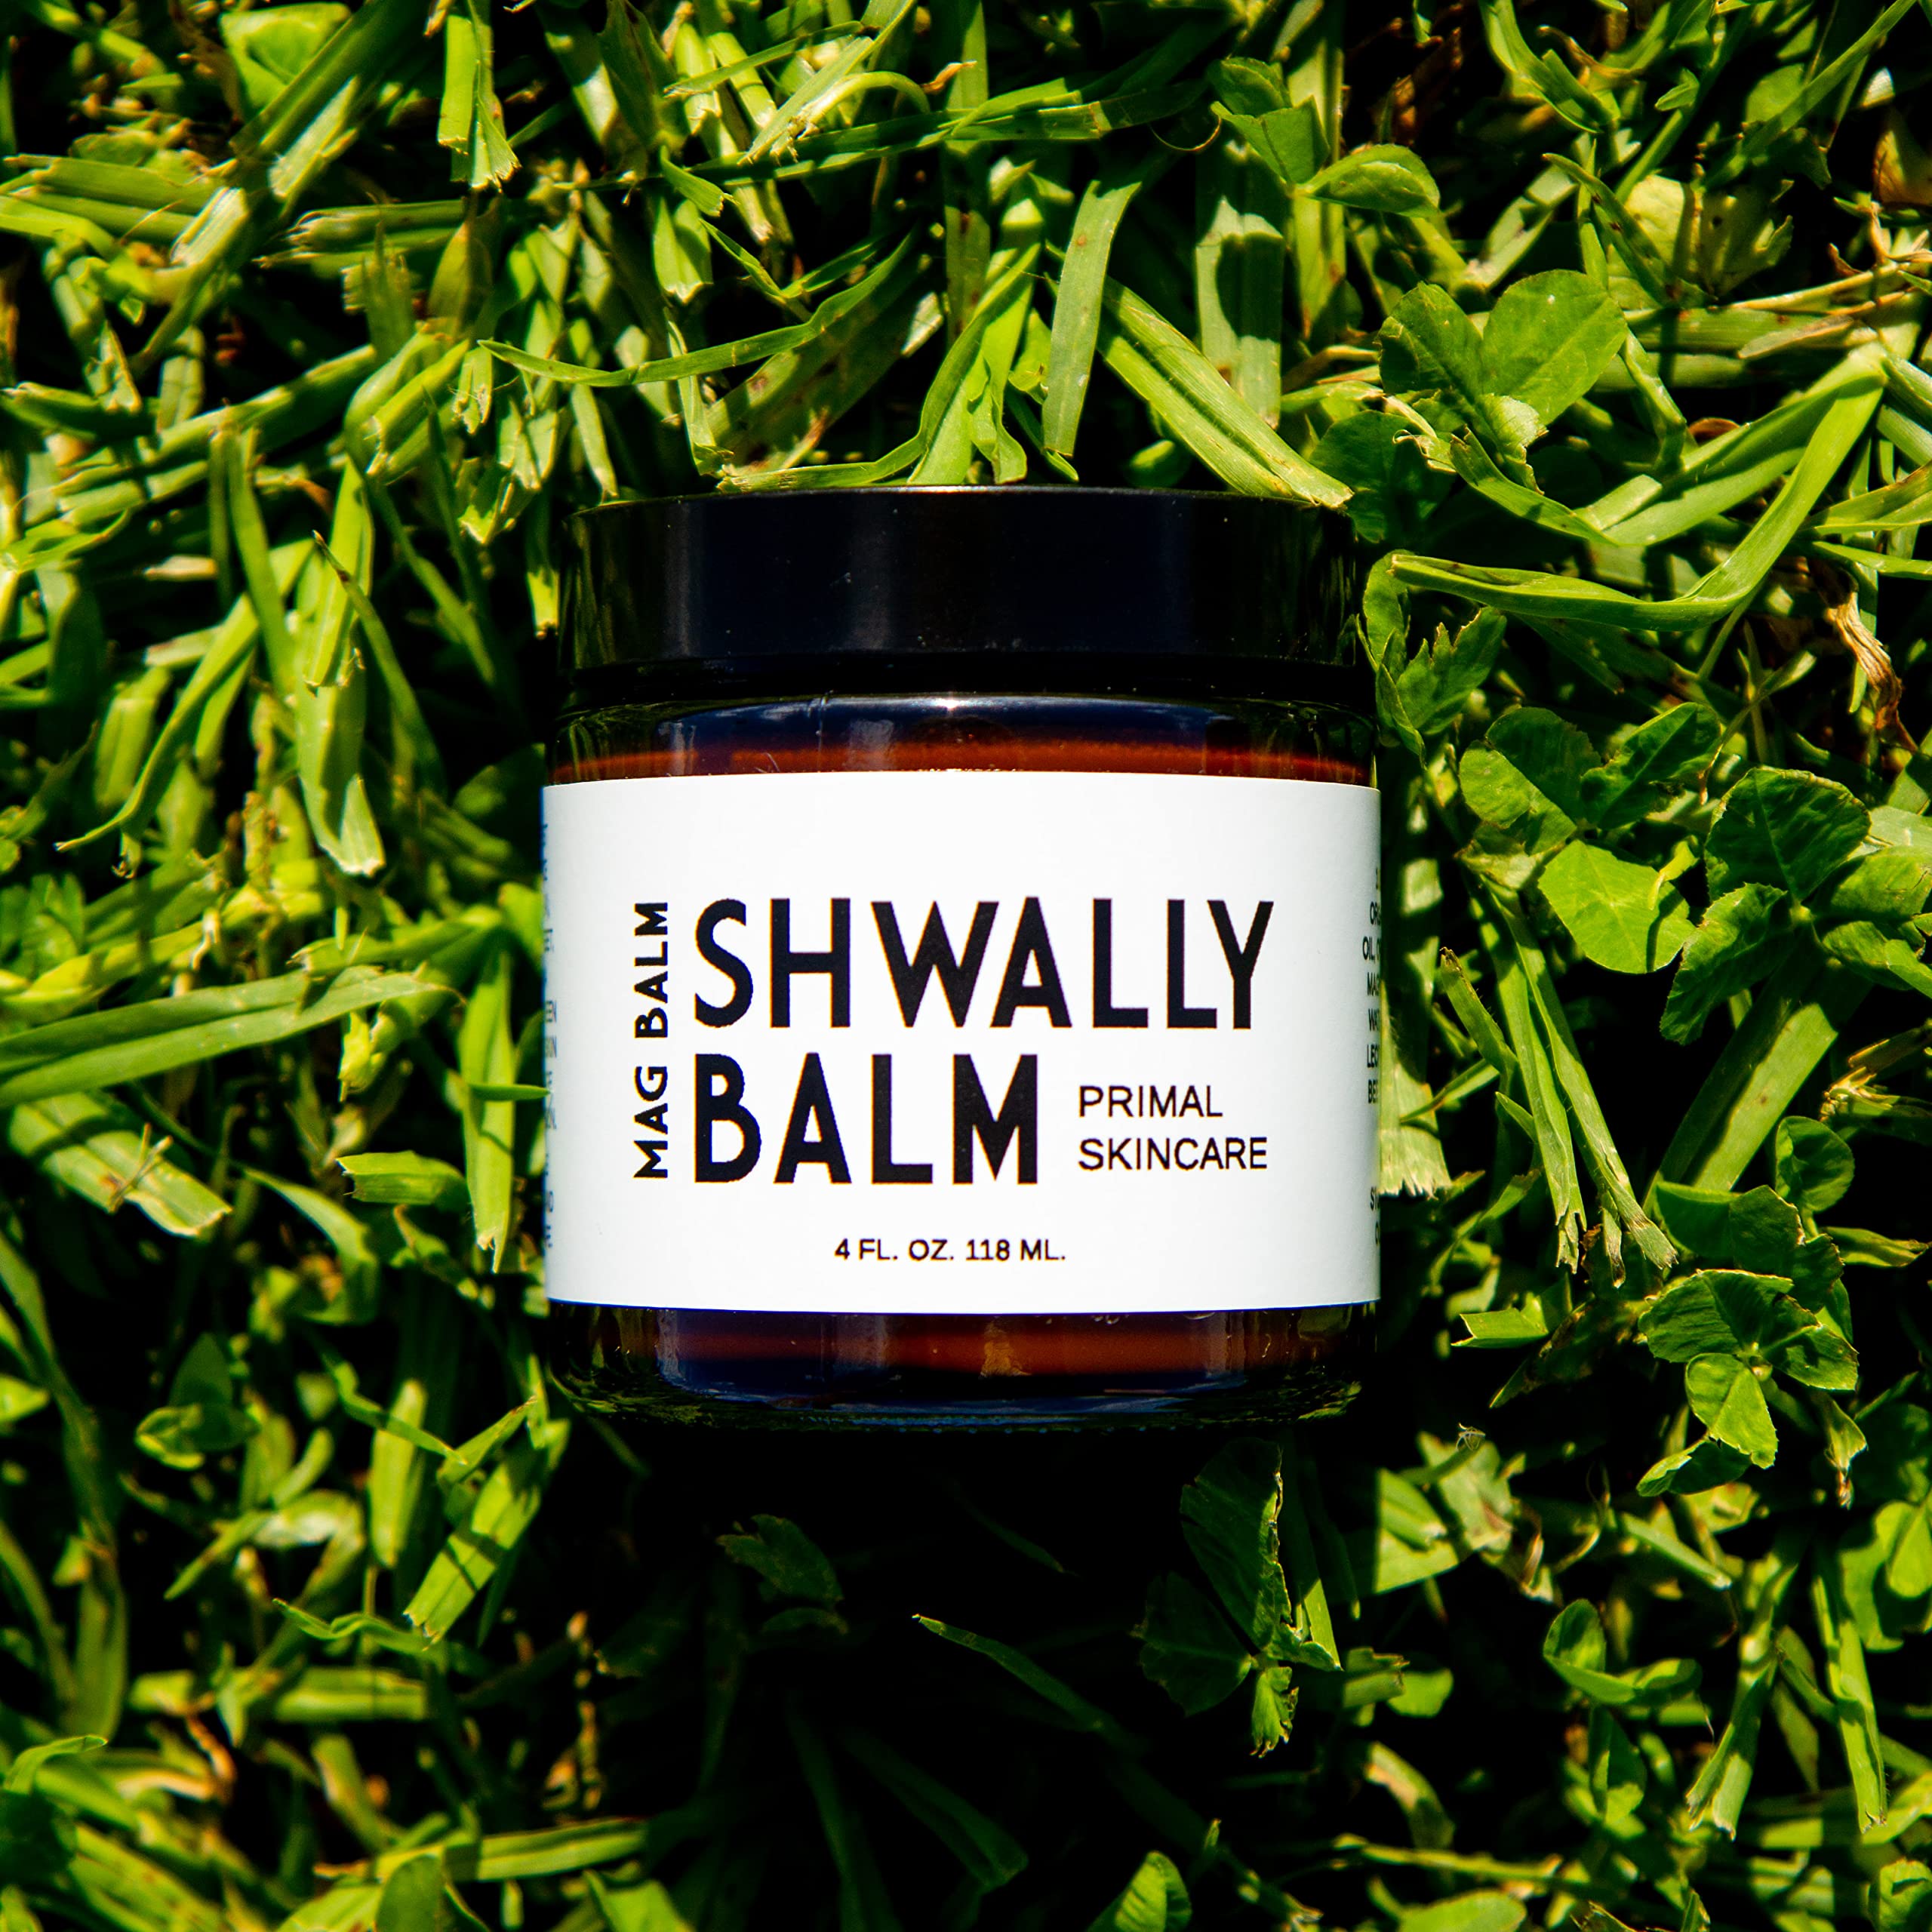 Shwally Paleo Magnesium Oil Cream - A True Seed-Oil Free & Primal Mag Balm - 100% Grass Fed Tallow, Avocado, Extra Virgin Olive Oil with Zechstein Magnesium - Subtle Vanilla Bean